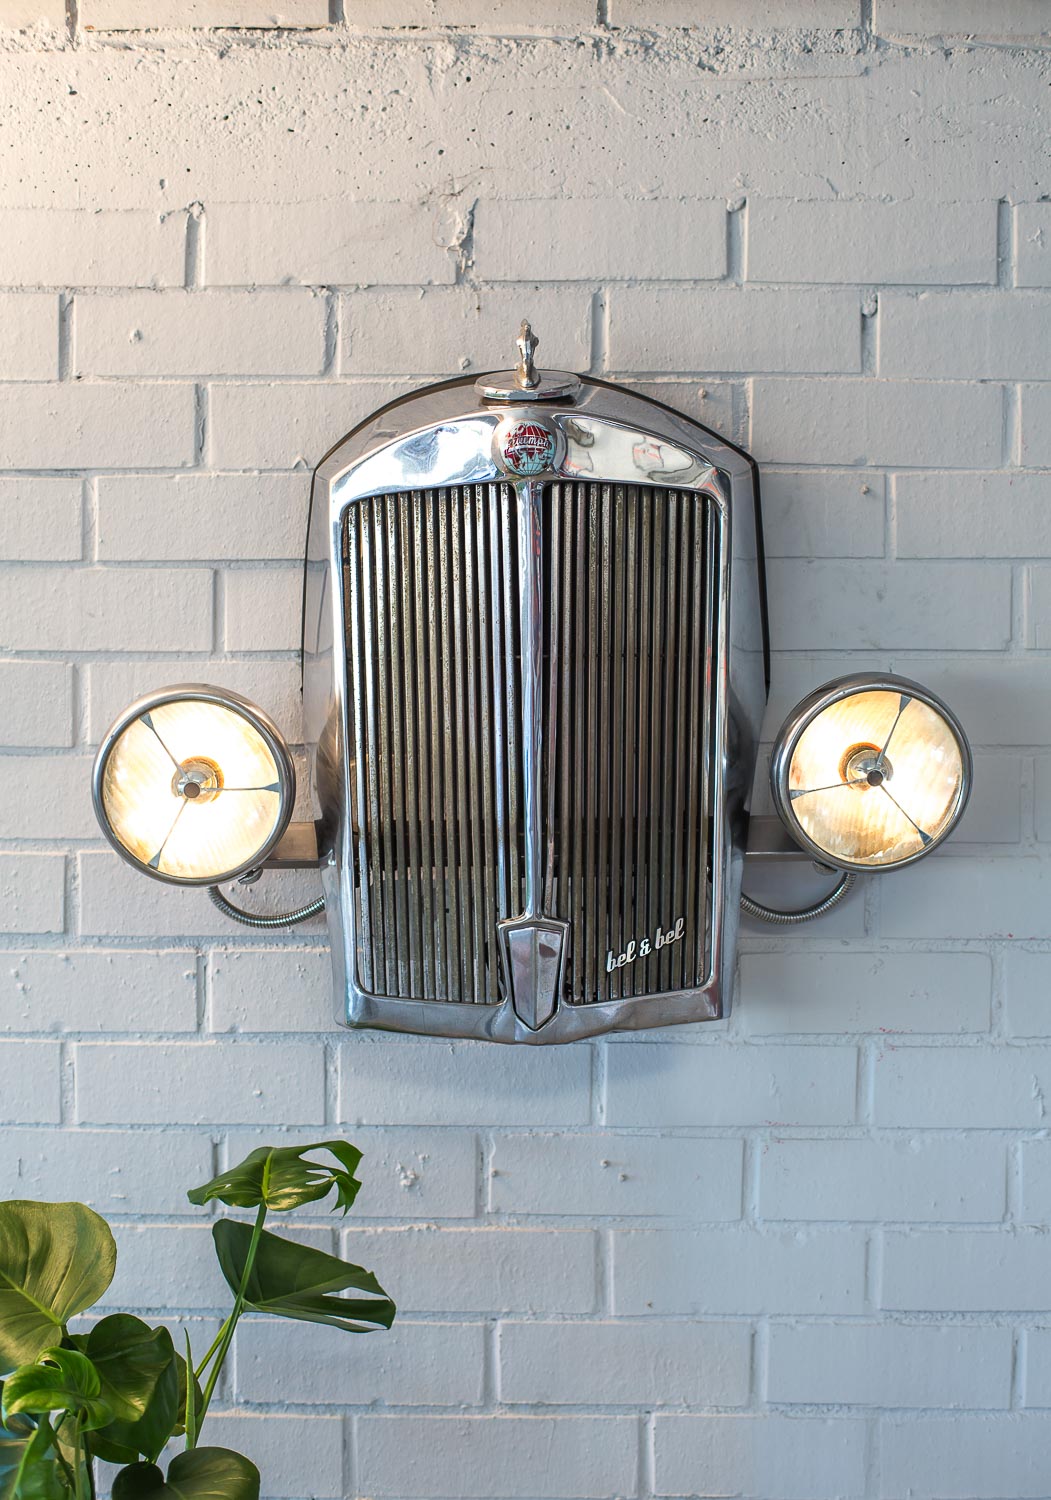 Download Custom Lamps made with Vehicles | Creations | Bel&Bel ...